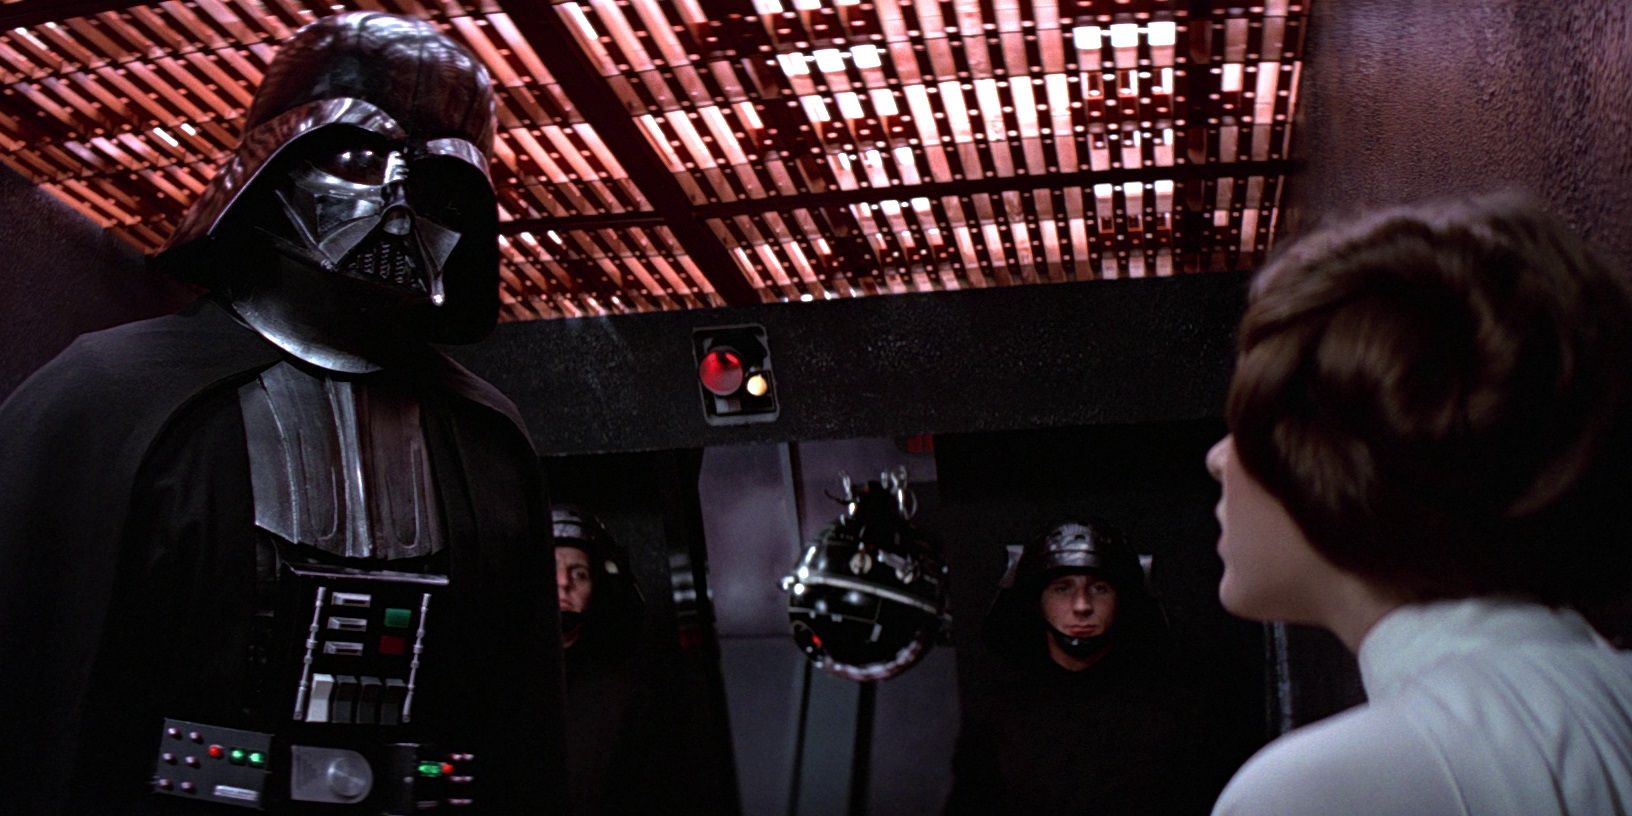 Darth Vader with Princess Leia in the torture room in Star Wars A New Hope